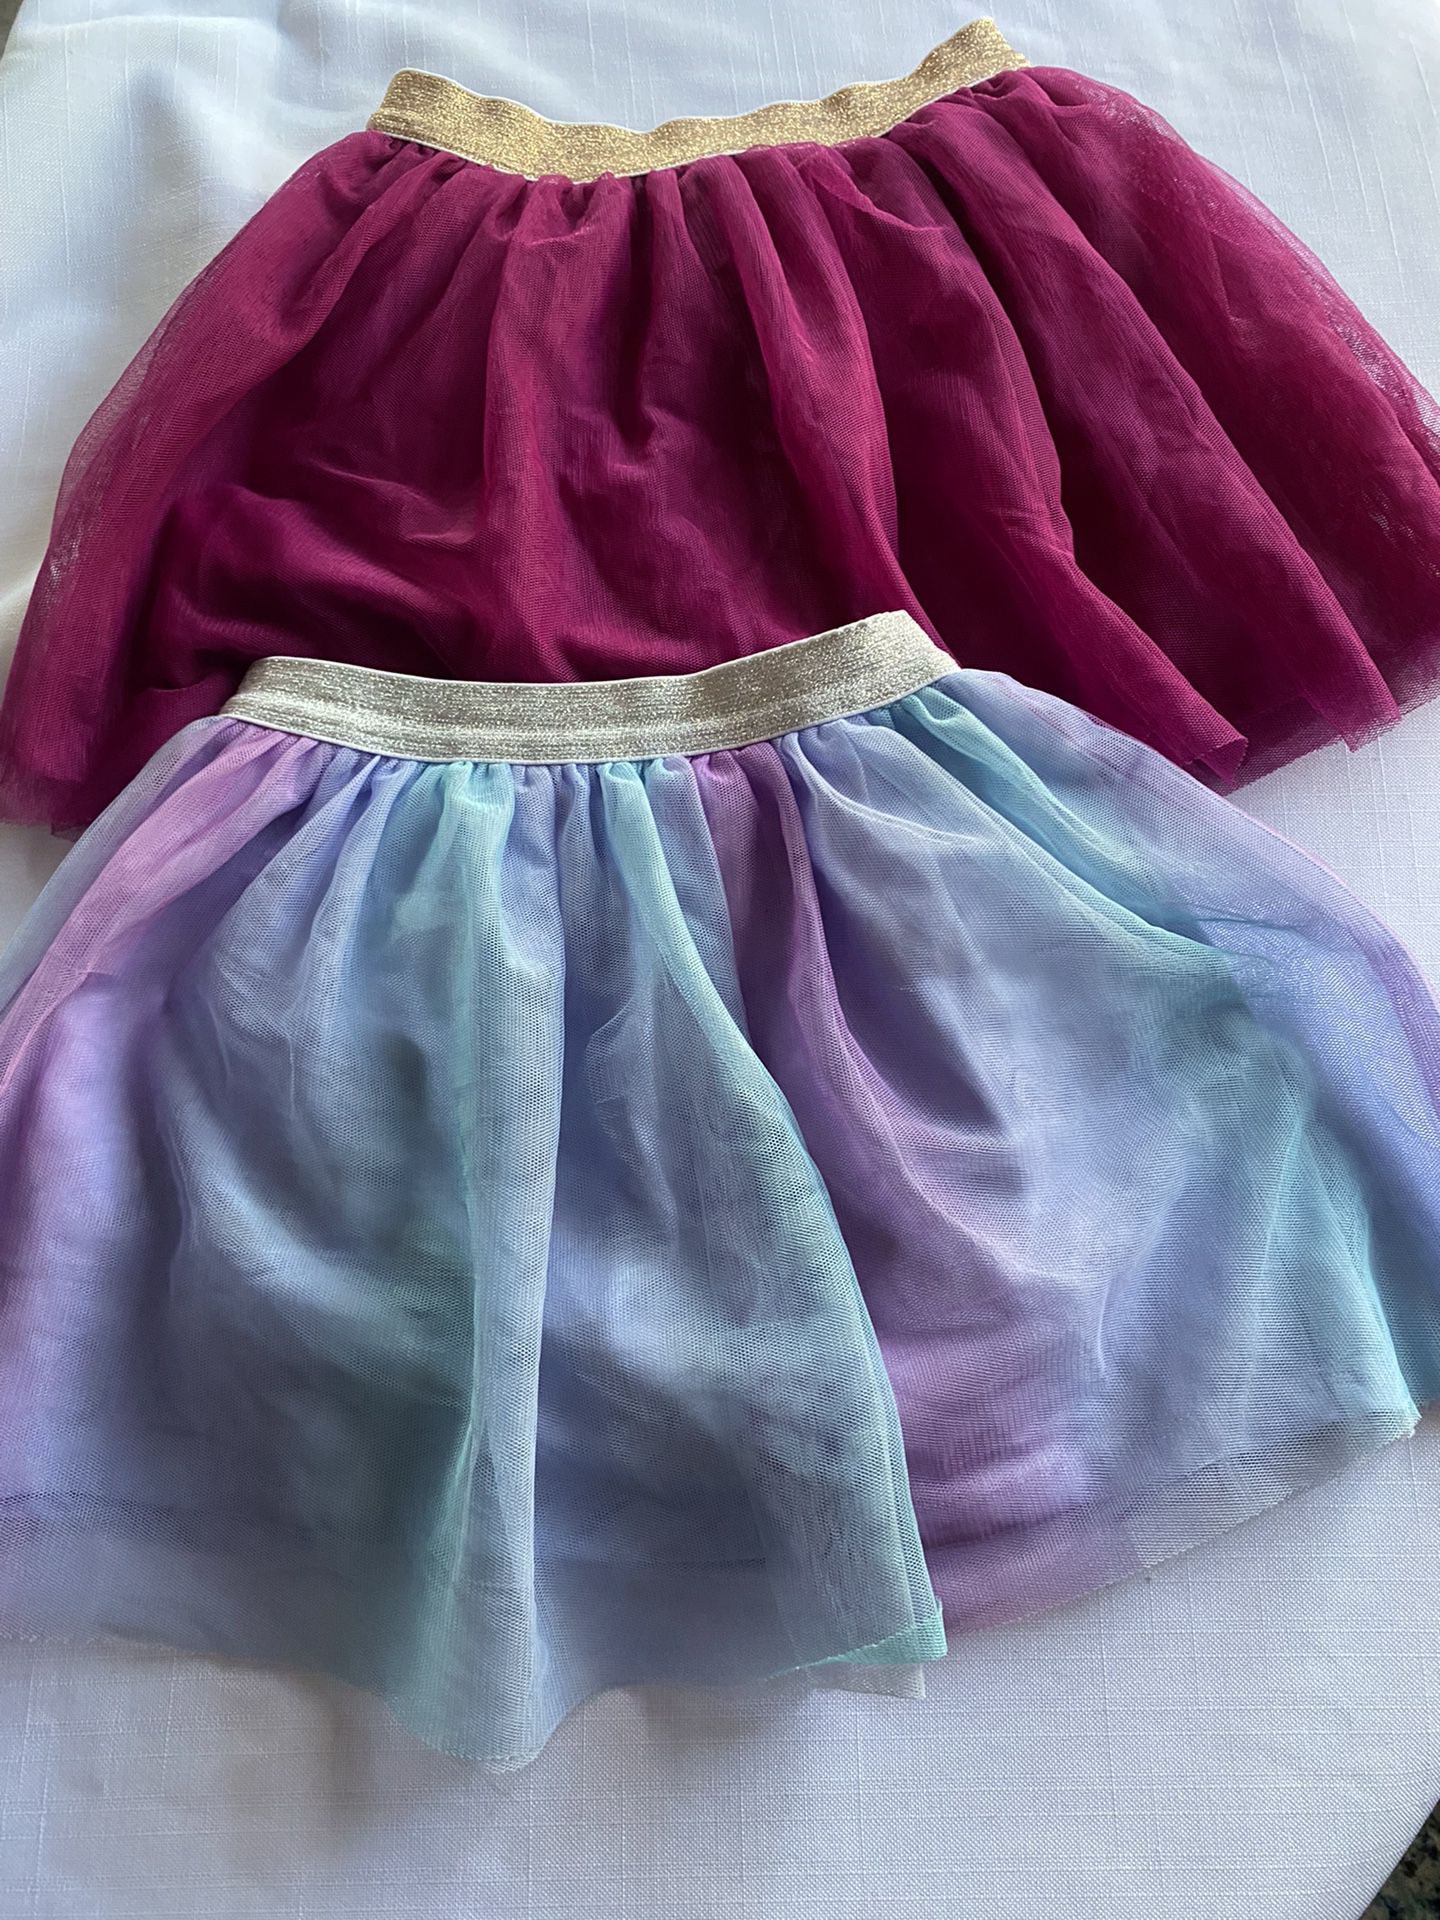 Jumping Bean Girls Purple and Teal/Purple Scooter Skirts Size 5